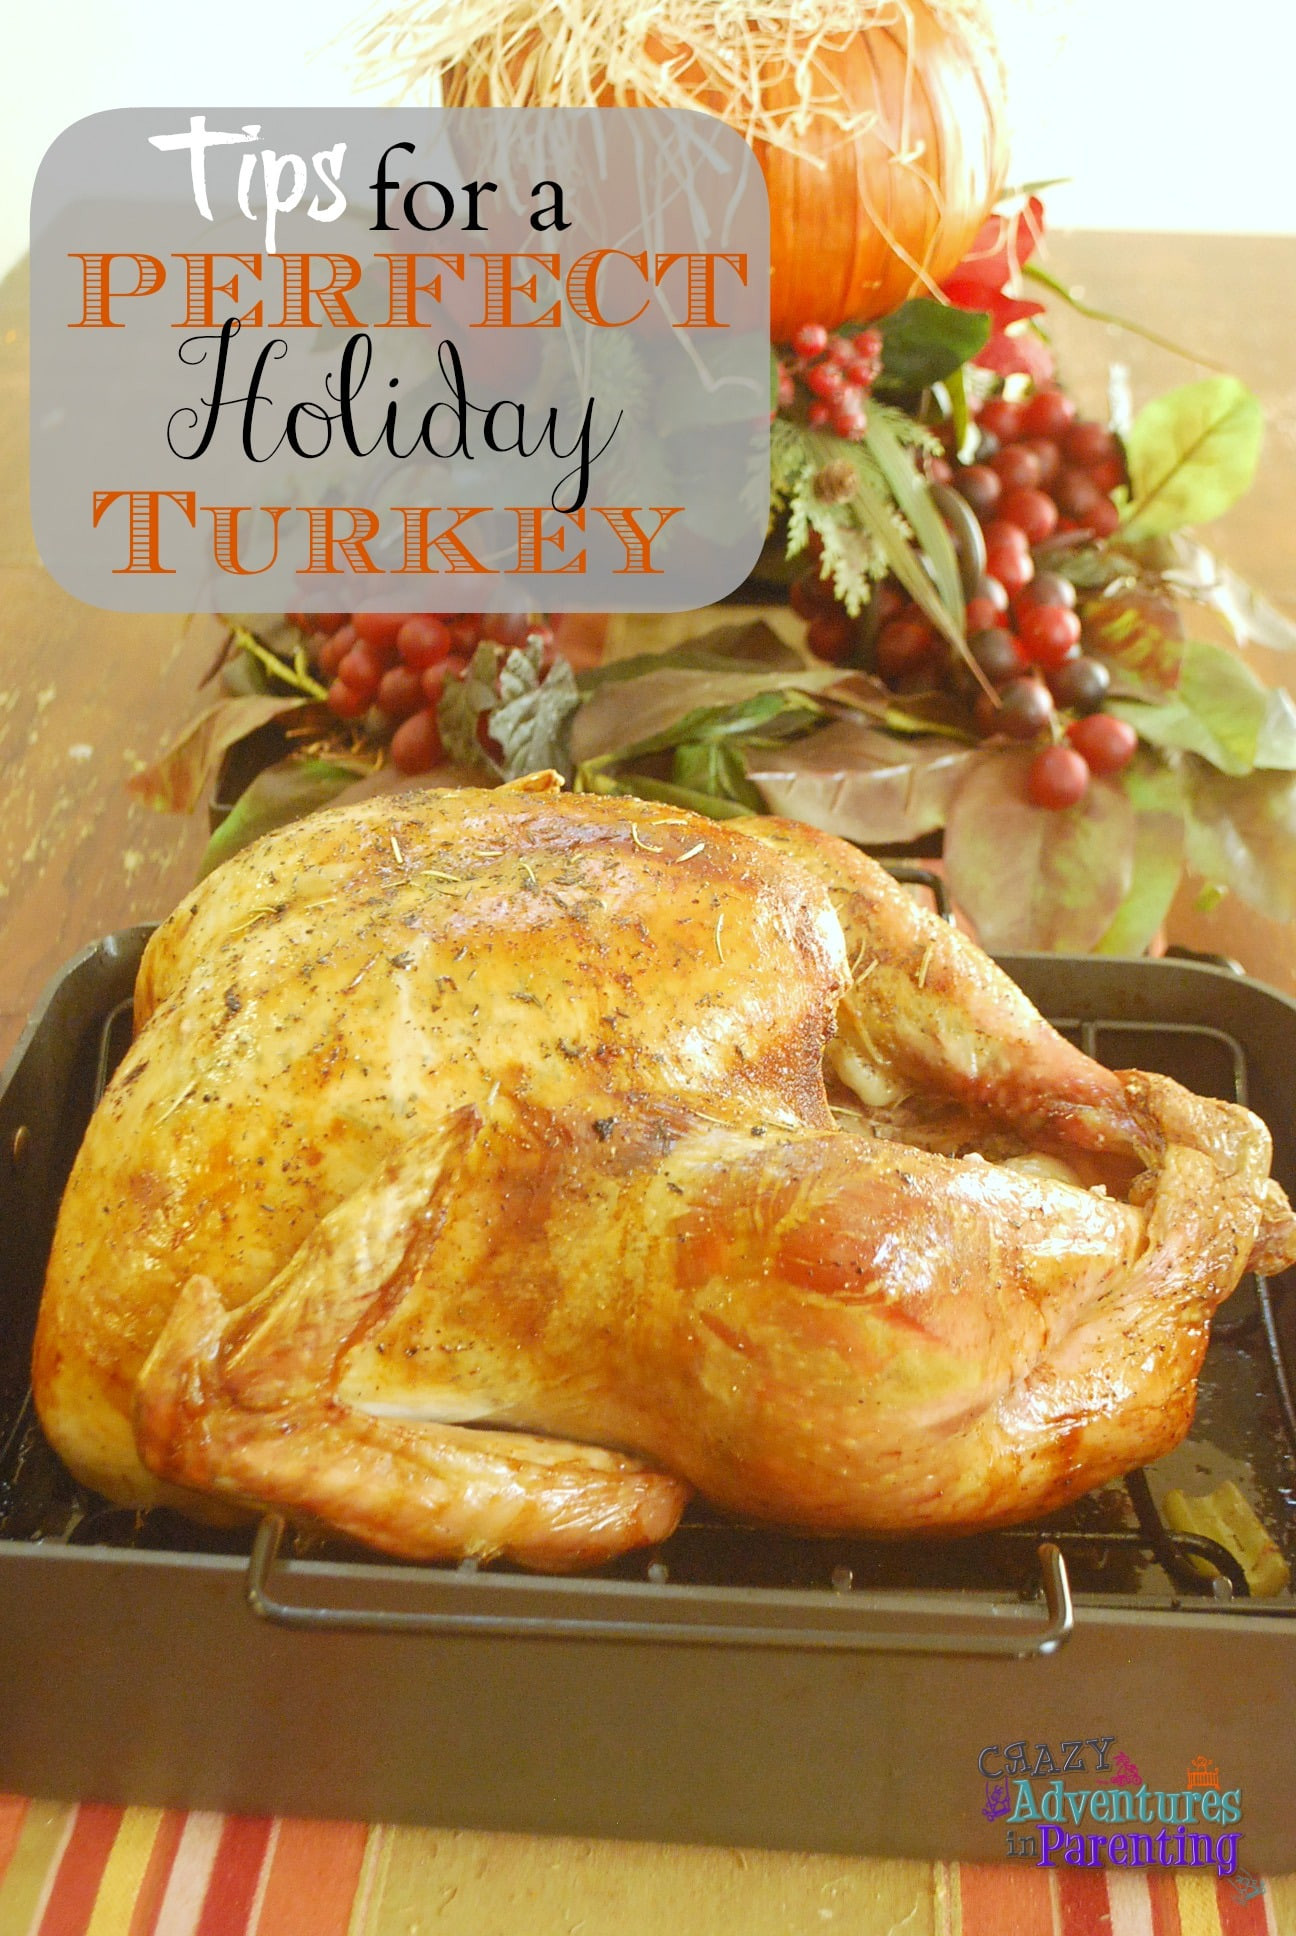 Best Thanksgiving Turkey Recipes
 Tips for the Best Holiday Turkey Recipe